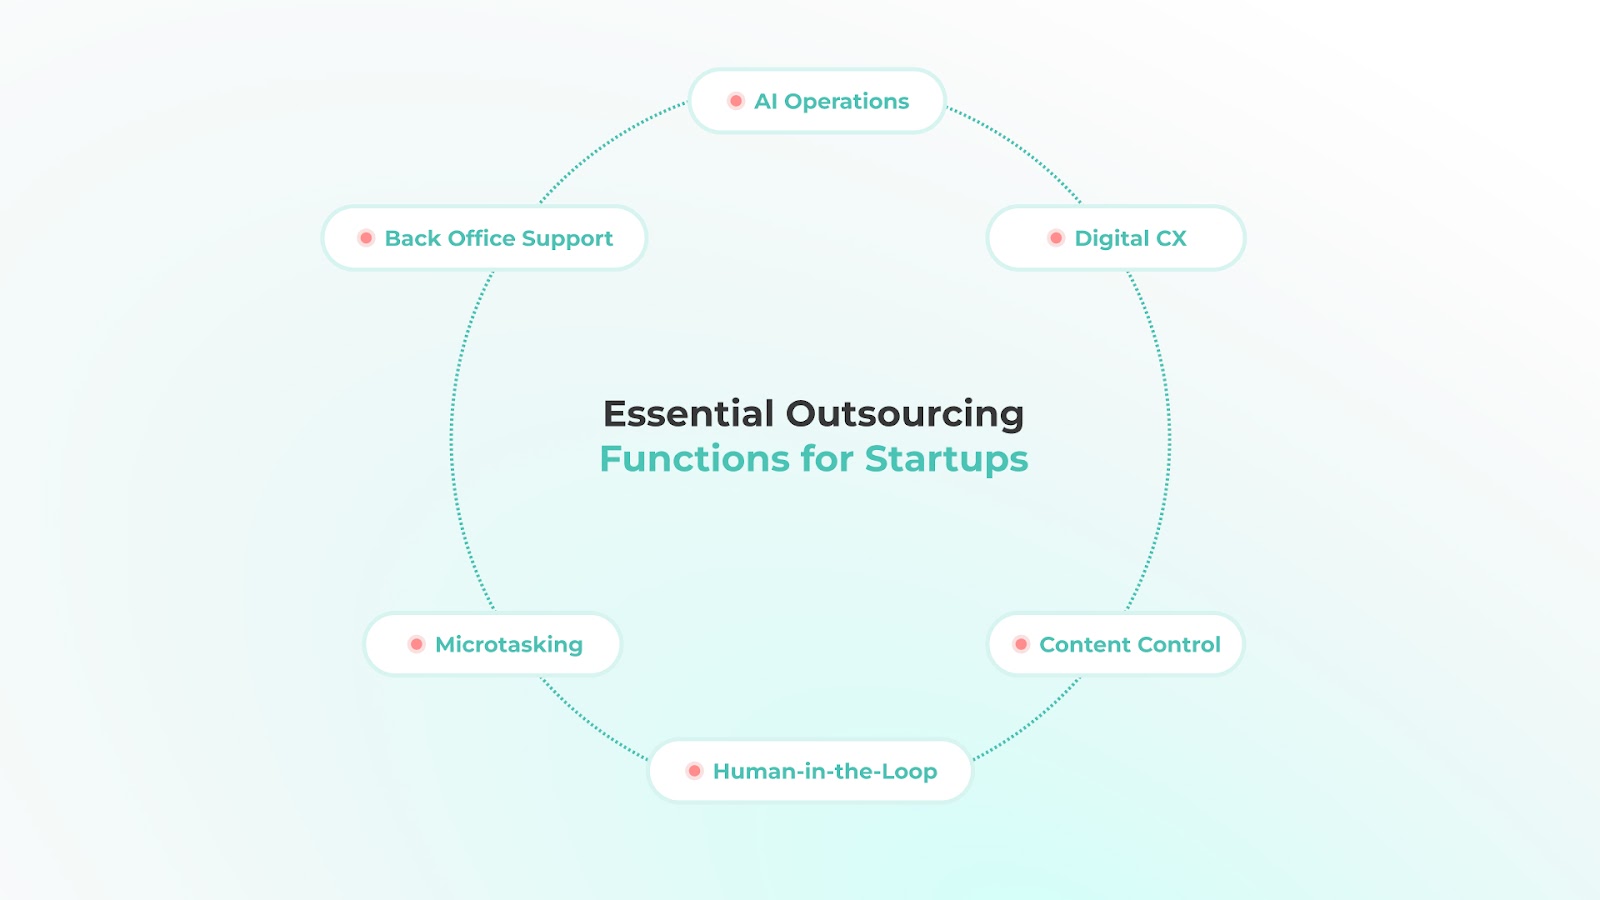 Functions that Startups Can Outsource